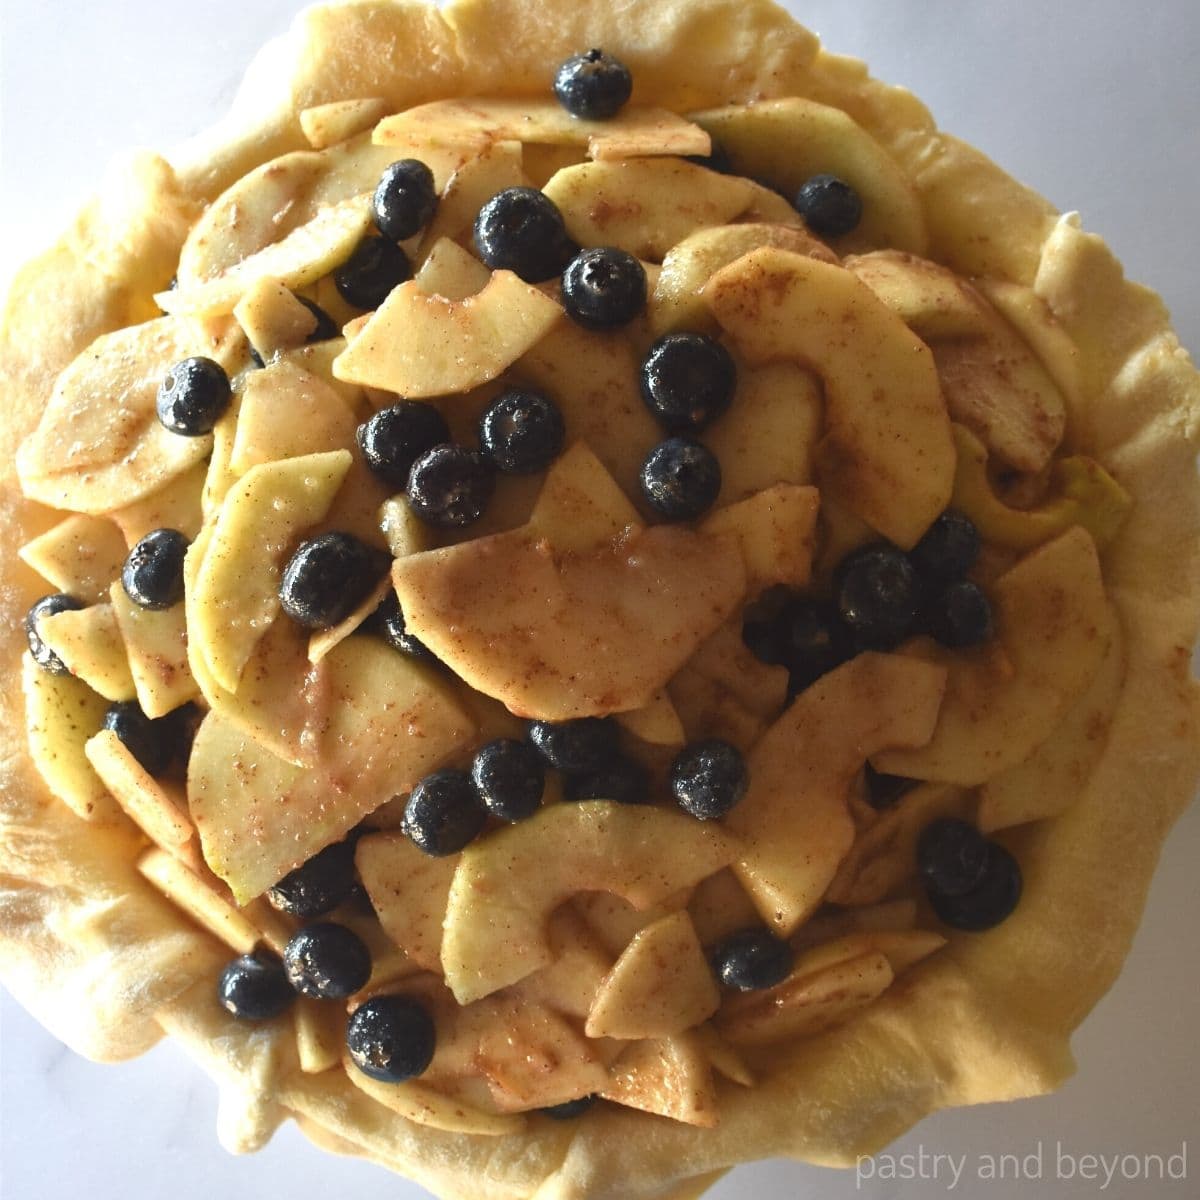 Pie crust that is filled with apple and blueberry filling.